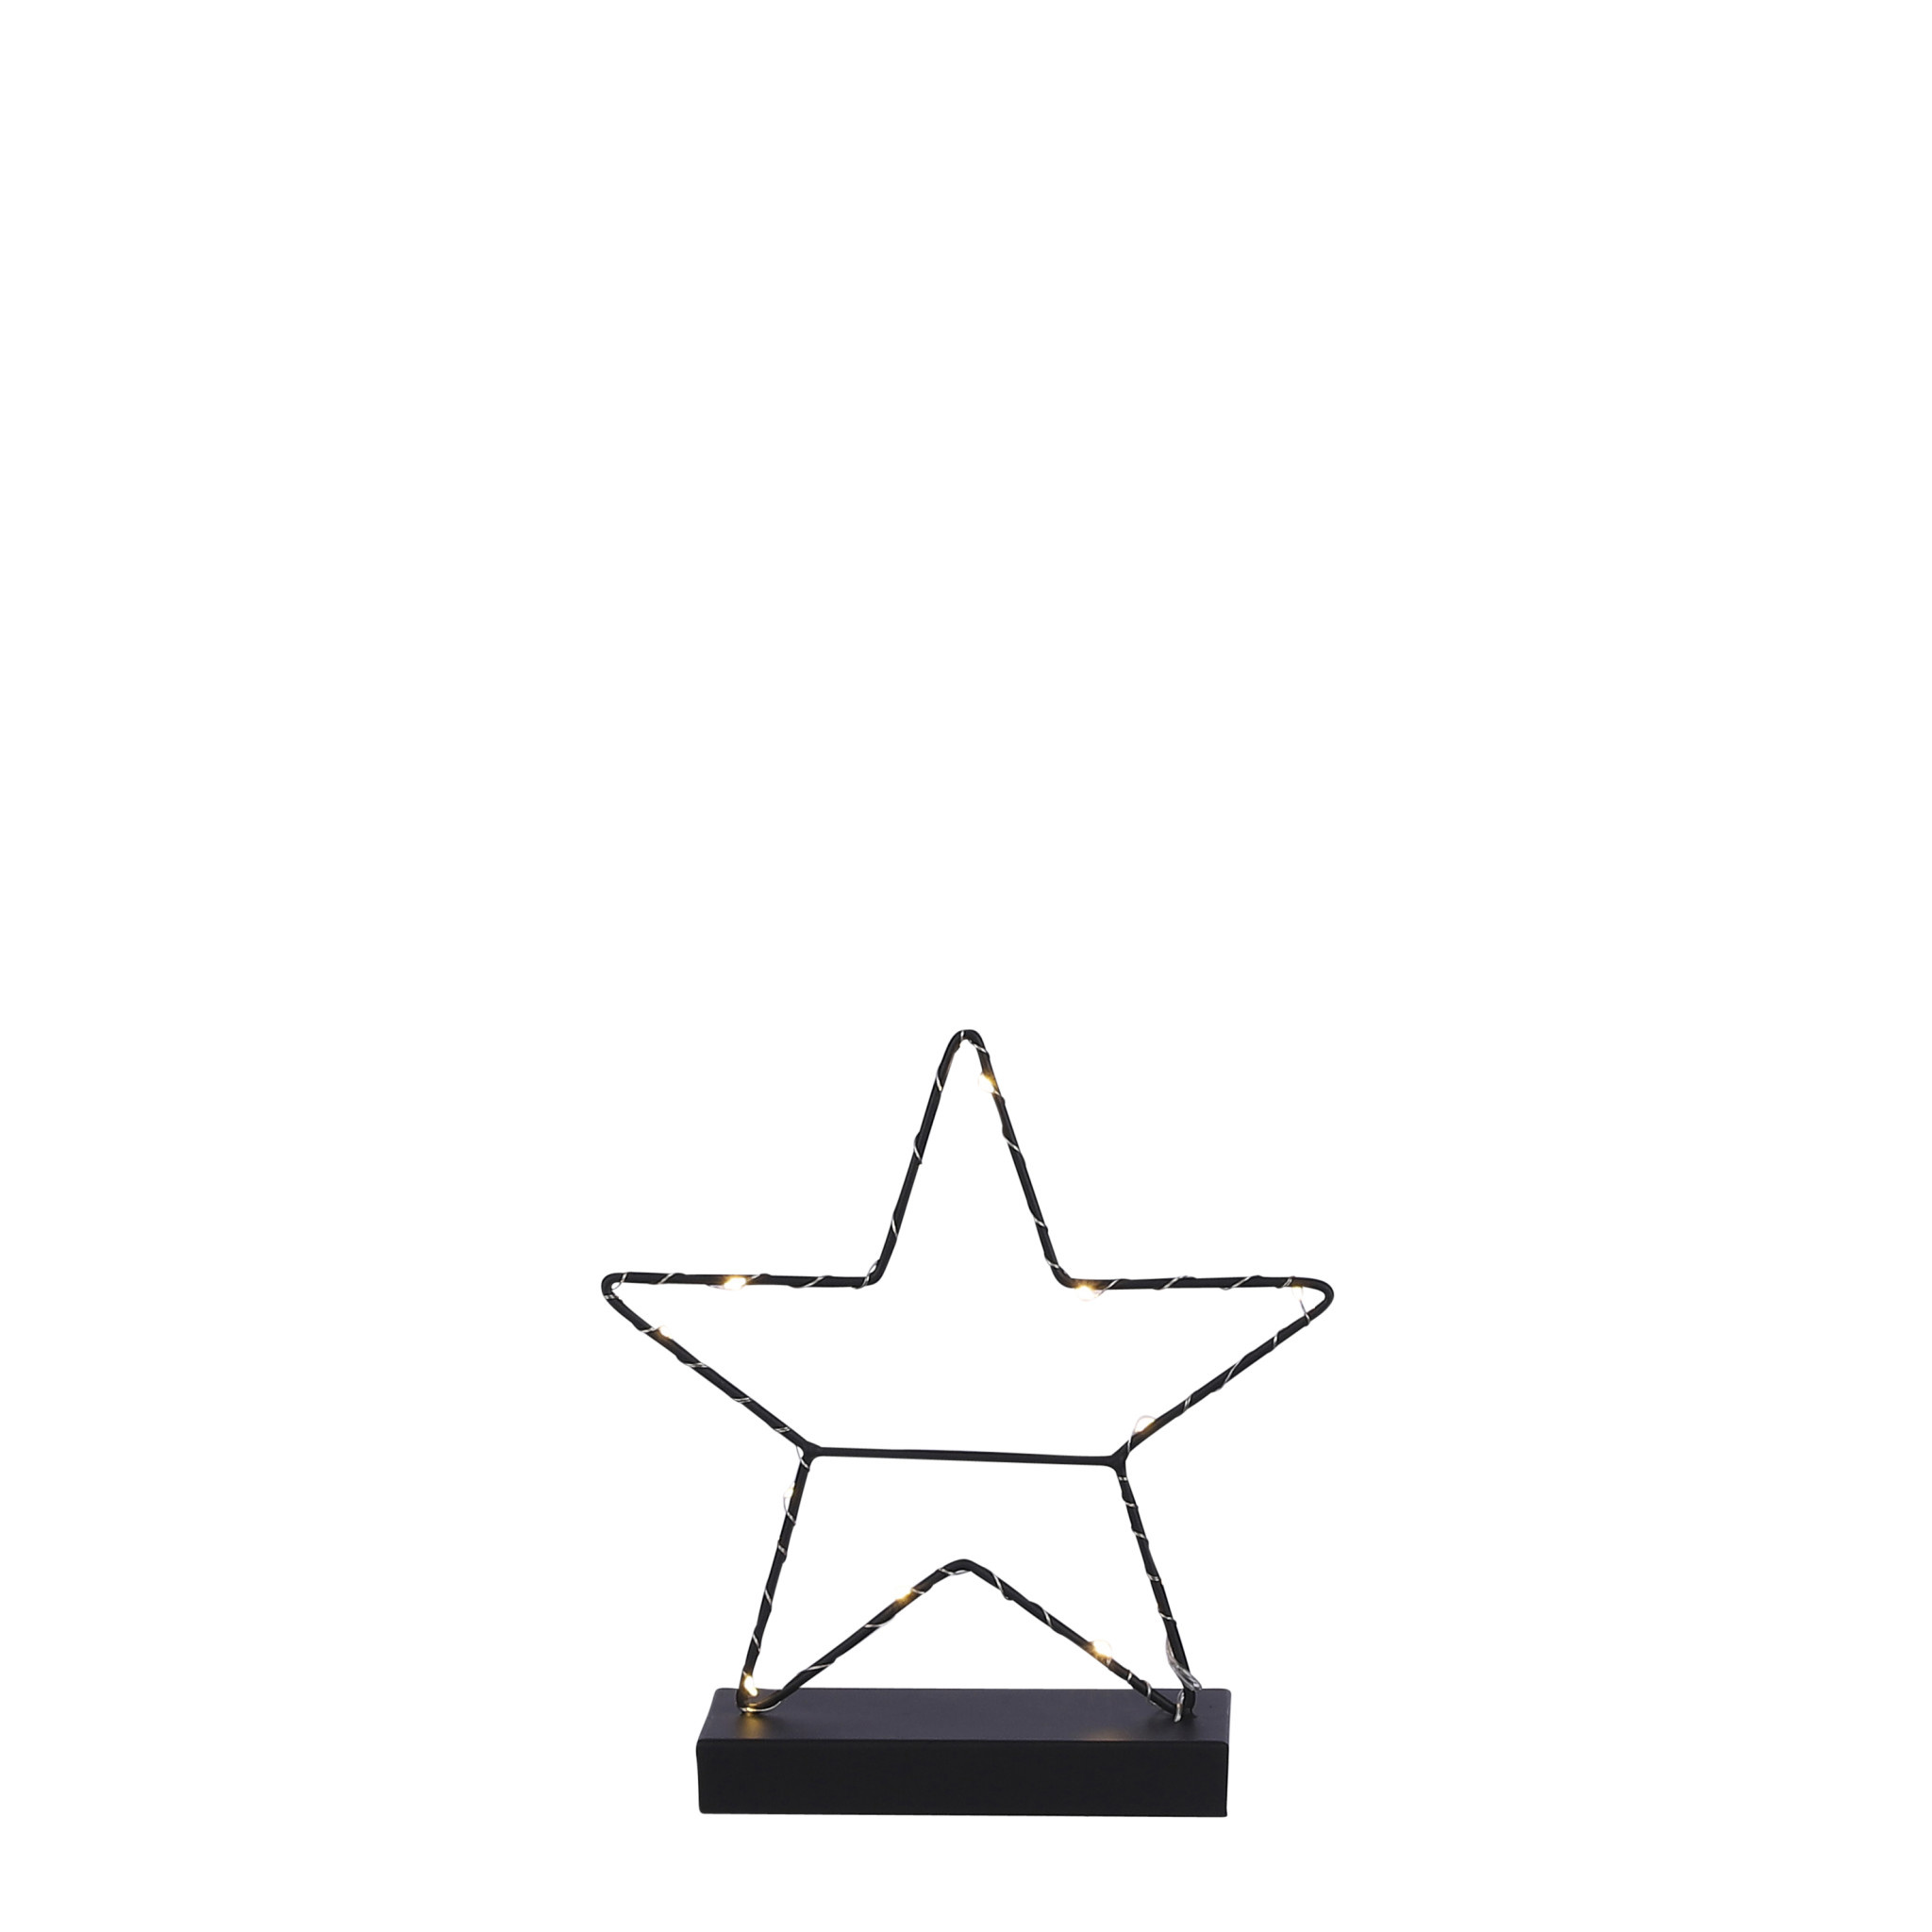 Decoration star black 12 led battery operated- w7xd25cm